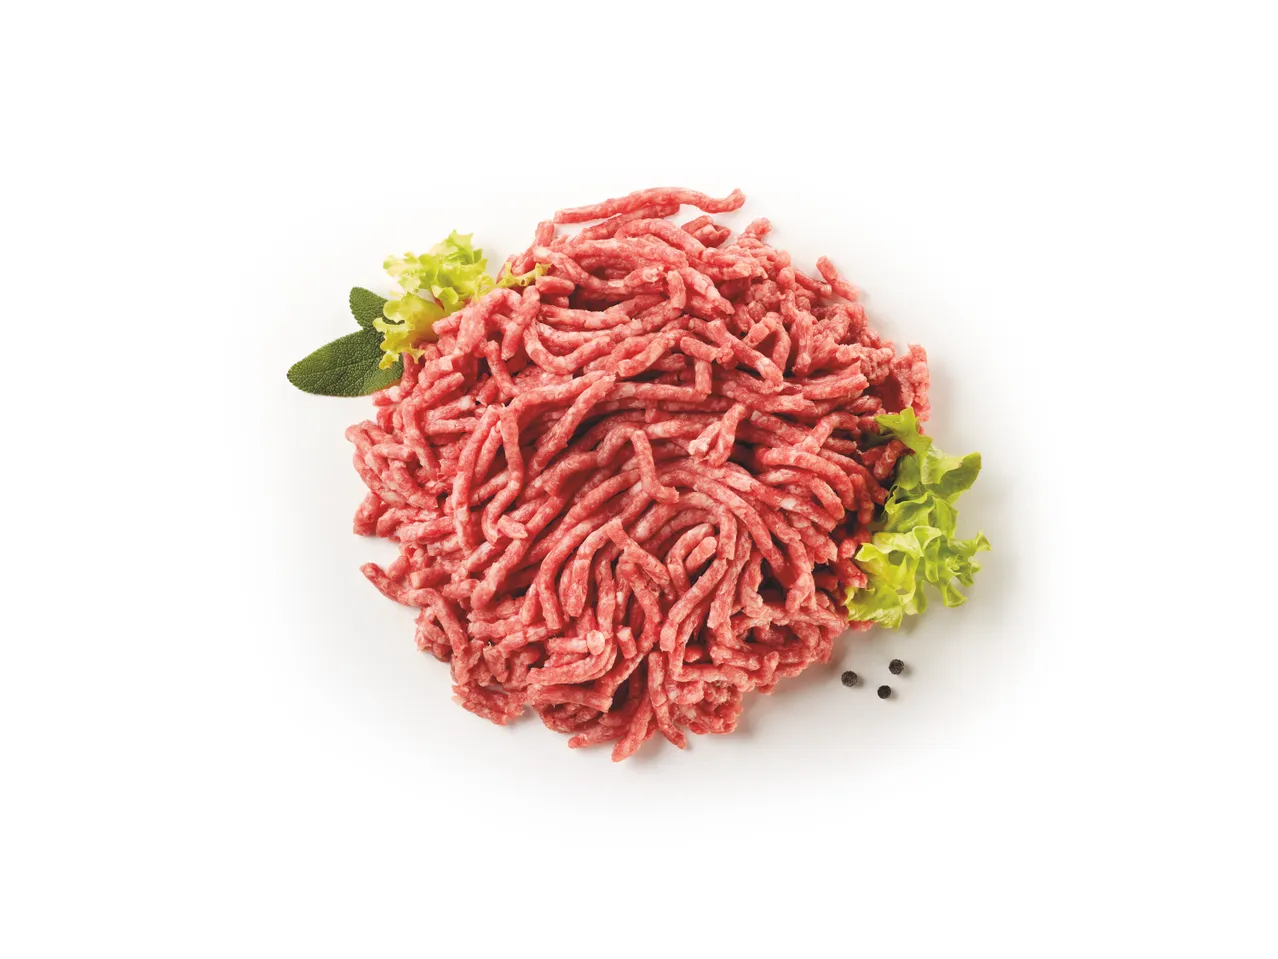 Go to full screen view: Minced Meat - Image 1